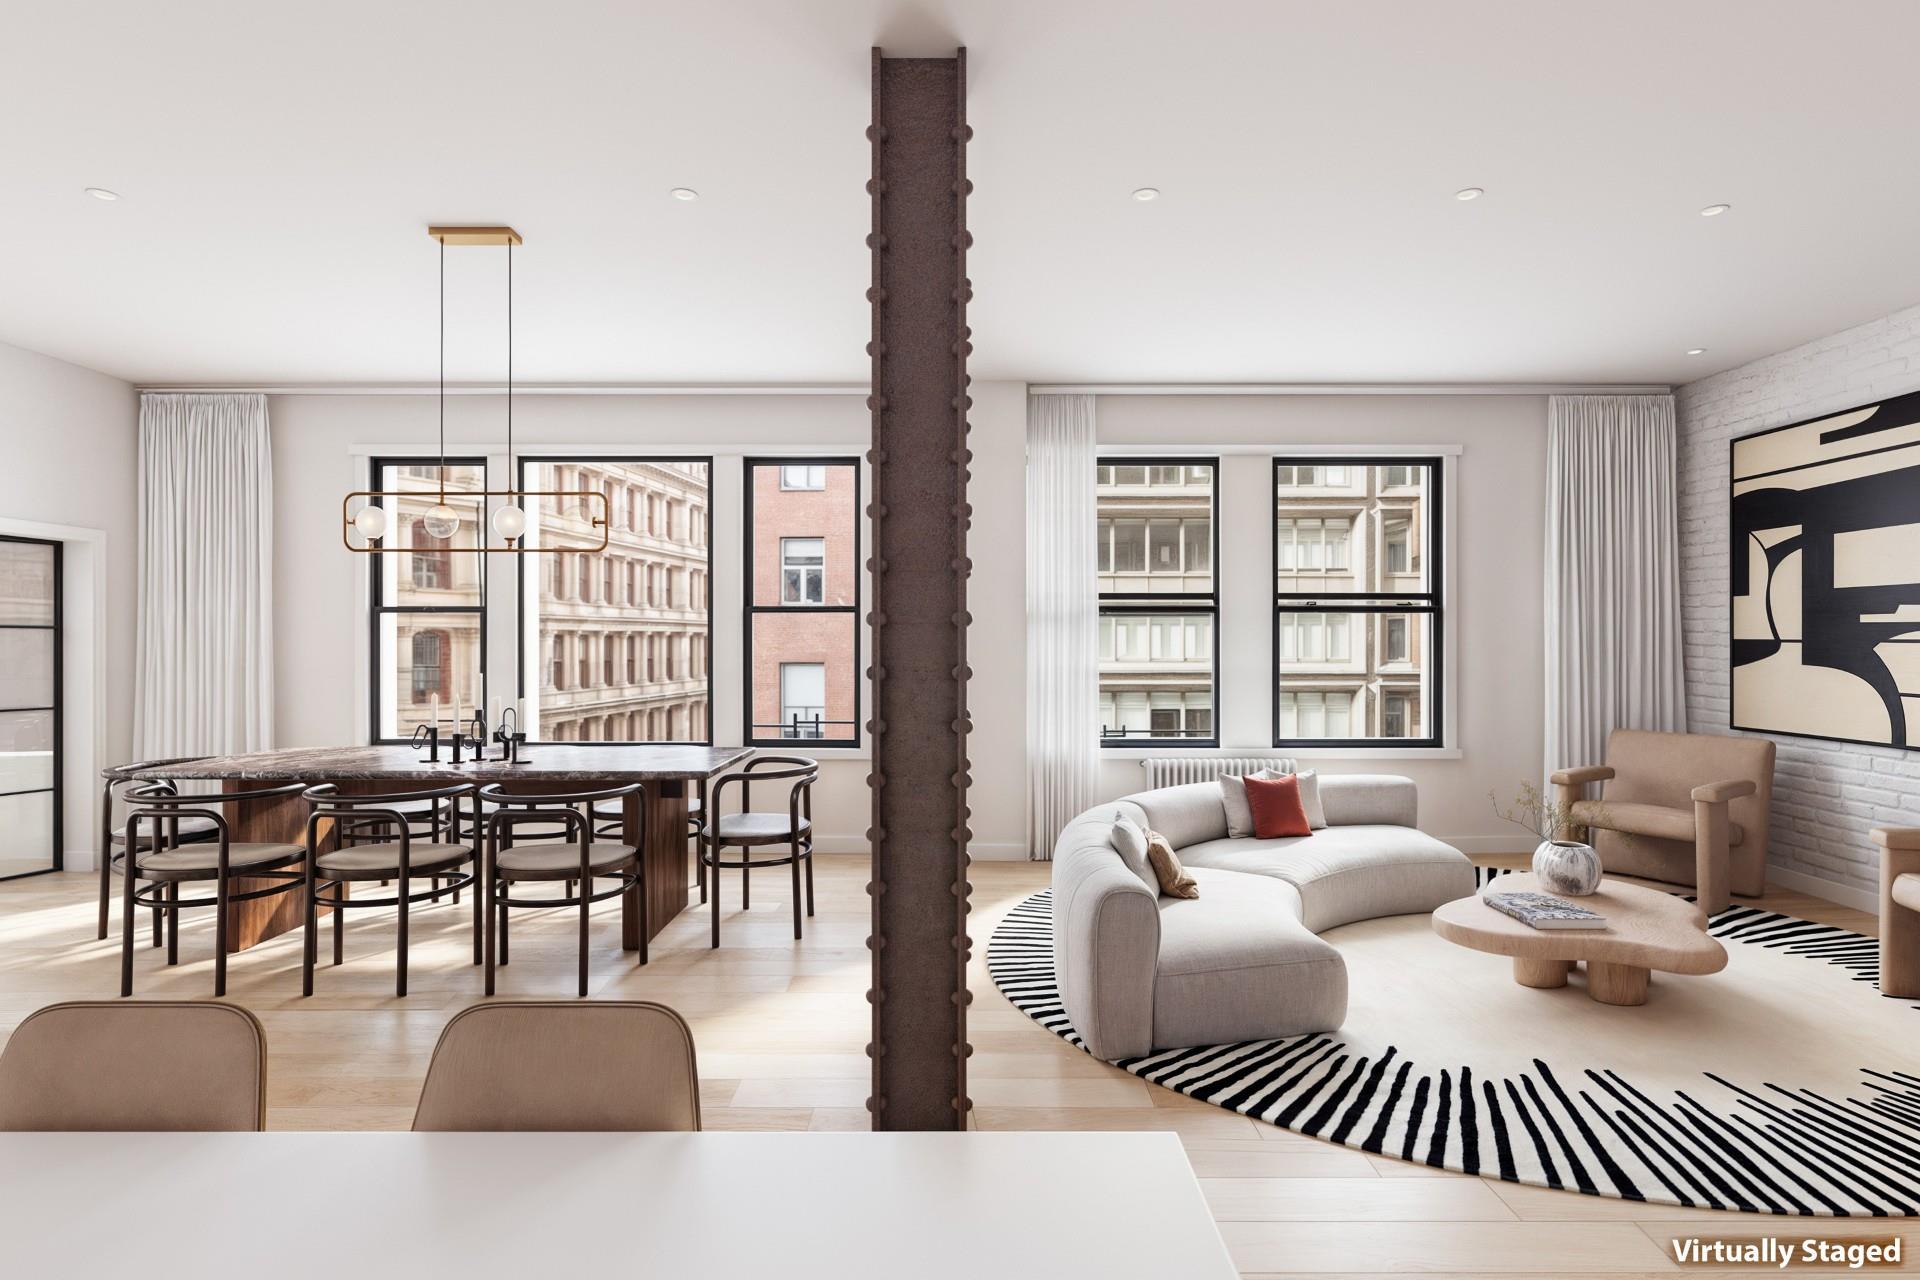 366 Broadway 4A, Tribeca, Downtown, NYC - 3 Bedrooms  
2 Bathrooms  
6 Rooms - 